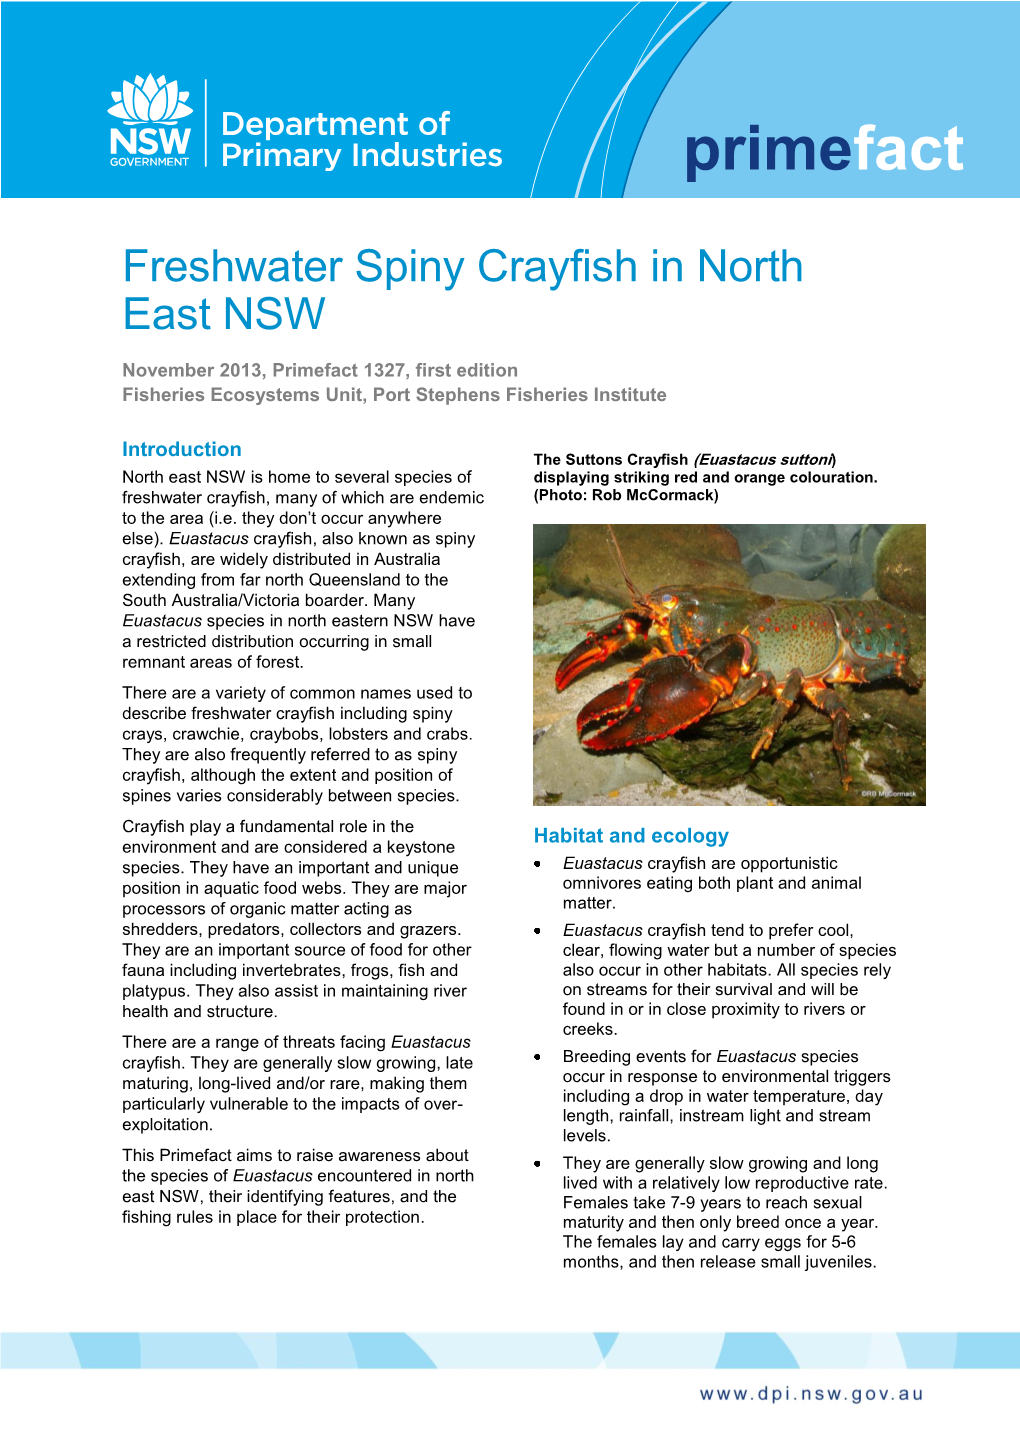 Freshwater Spiny Crayfish in North East NSW